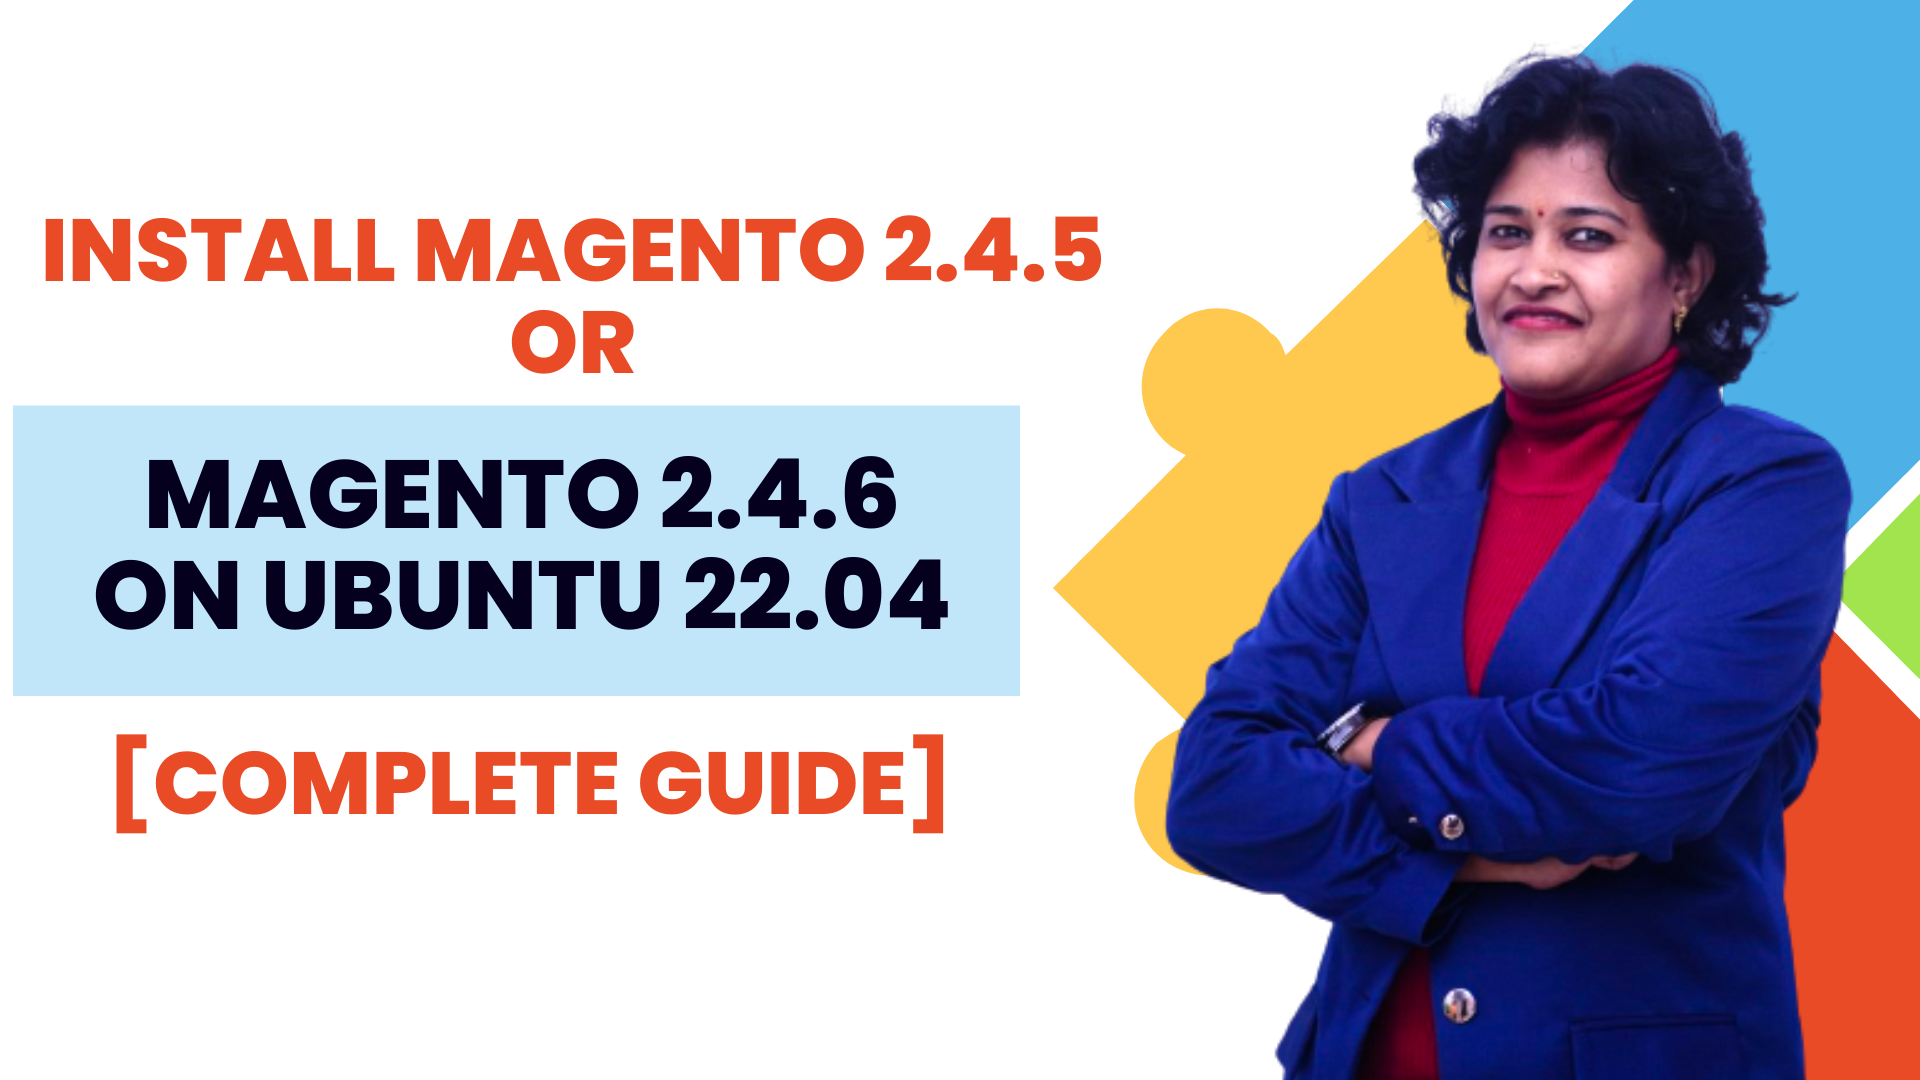 Install Magento 2.4.5 or Magento 2.4.6 on Ubuntu 22.04 [Complete Guide] –  TheCoachSMB